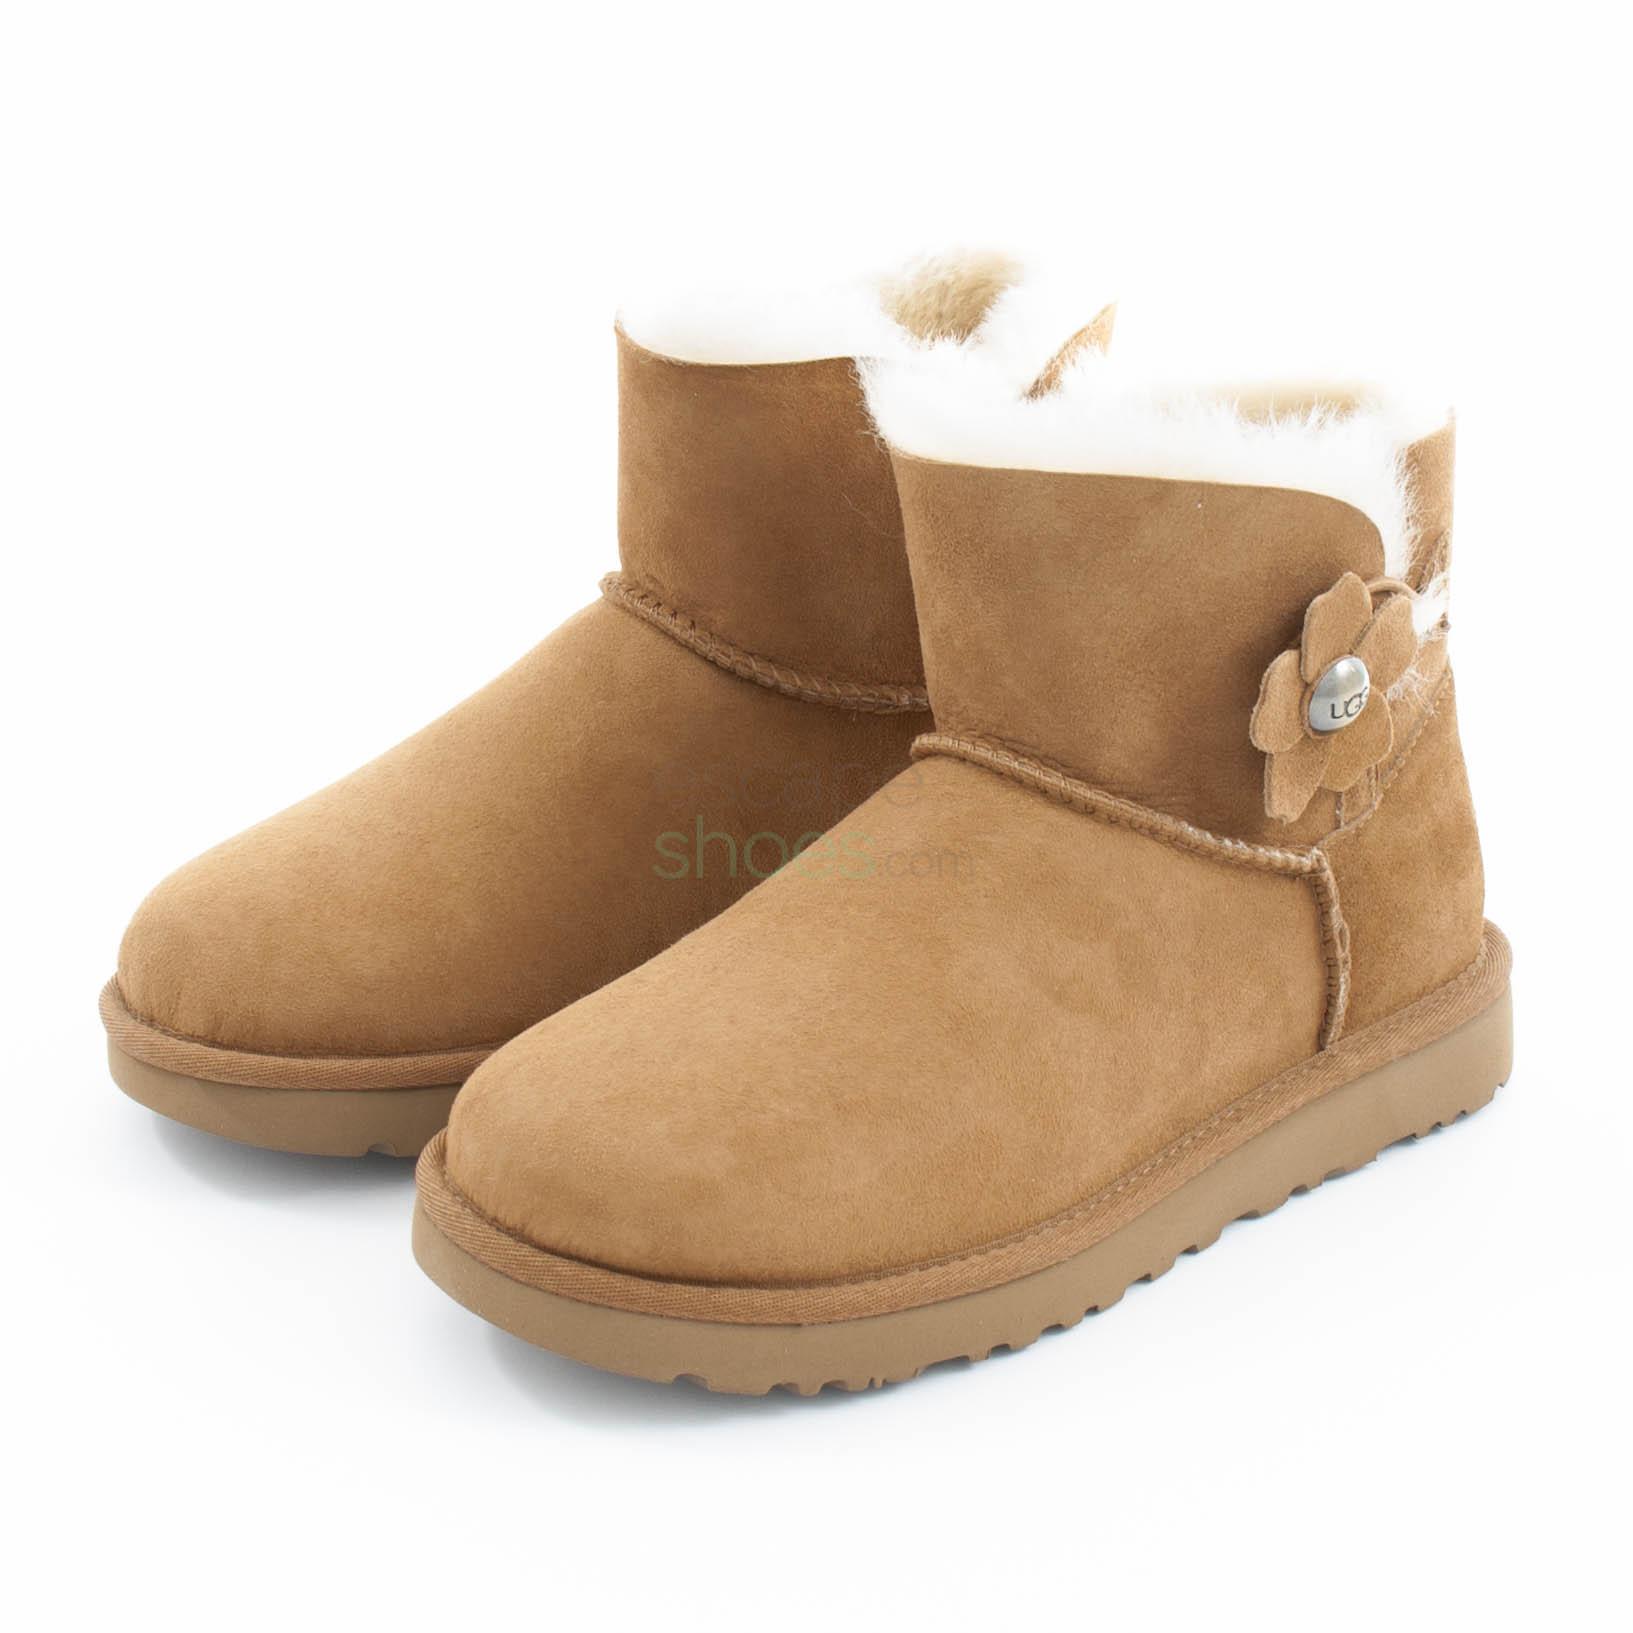 ugg mini bailey button boots on sale